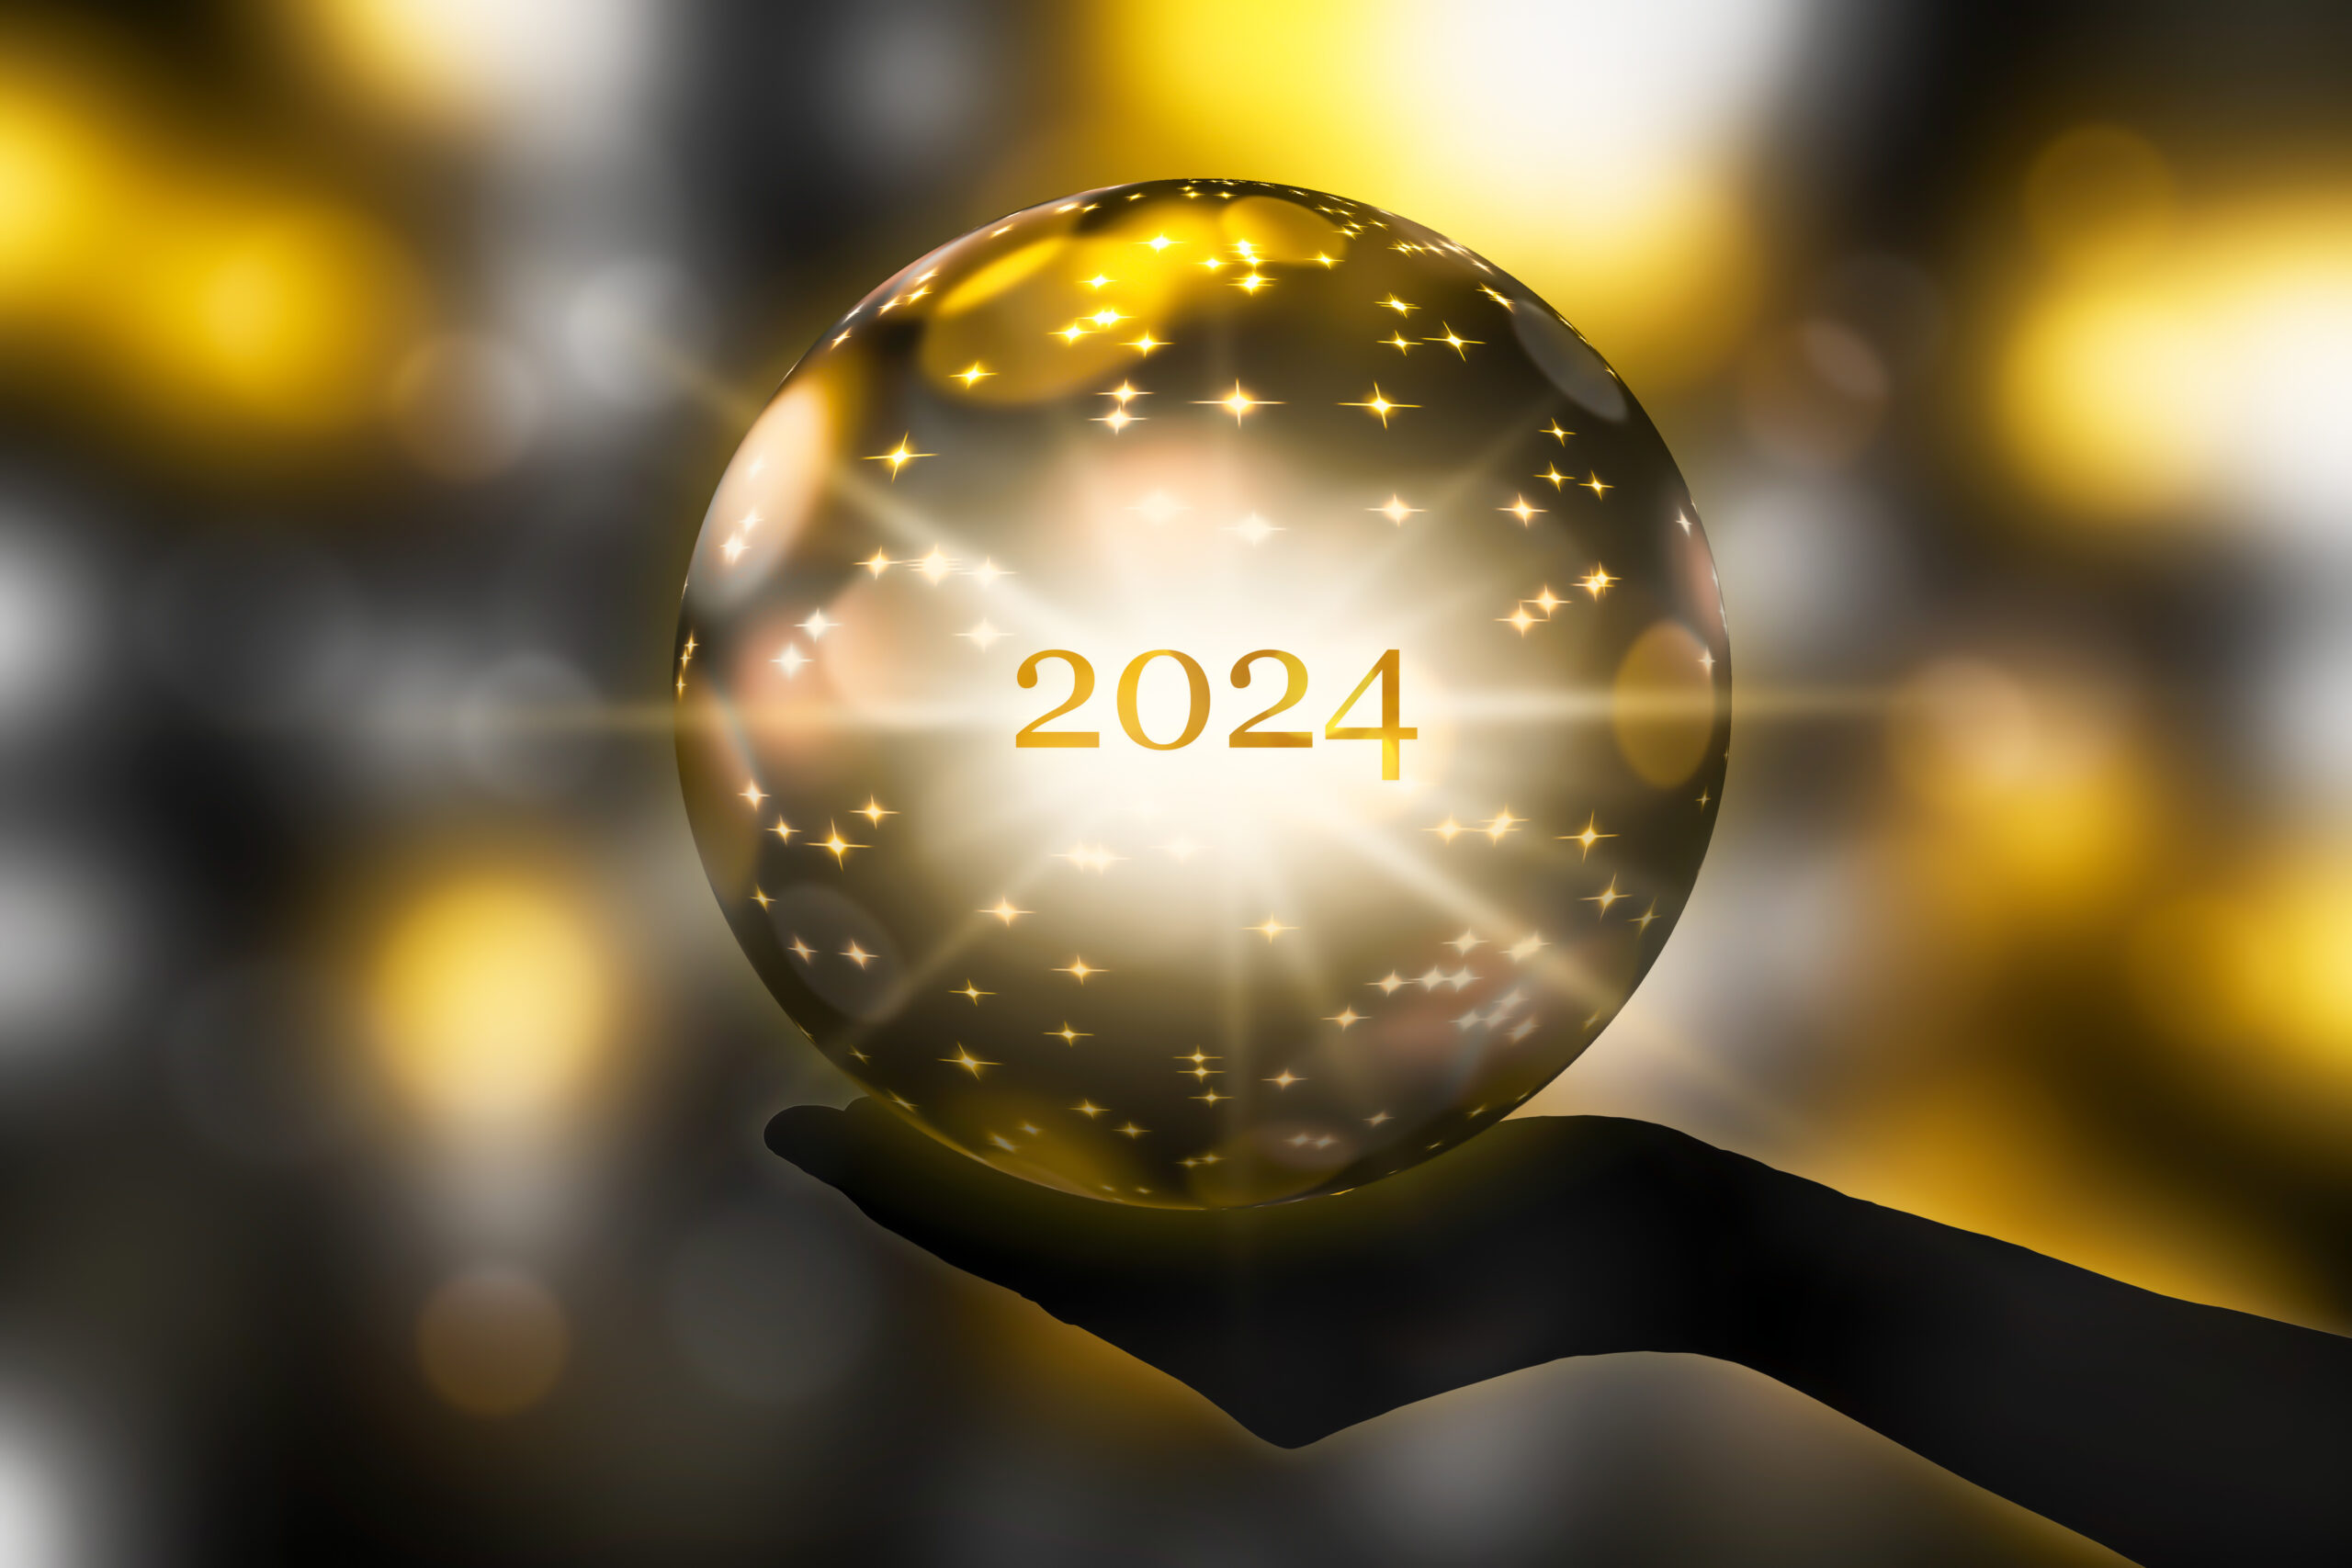 Crystal ball with "2024" written inside - held by hand with a lighted background